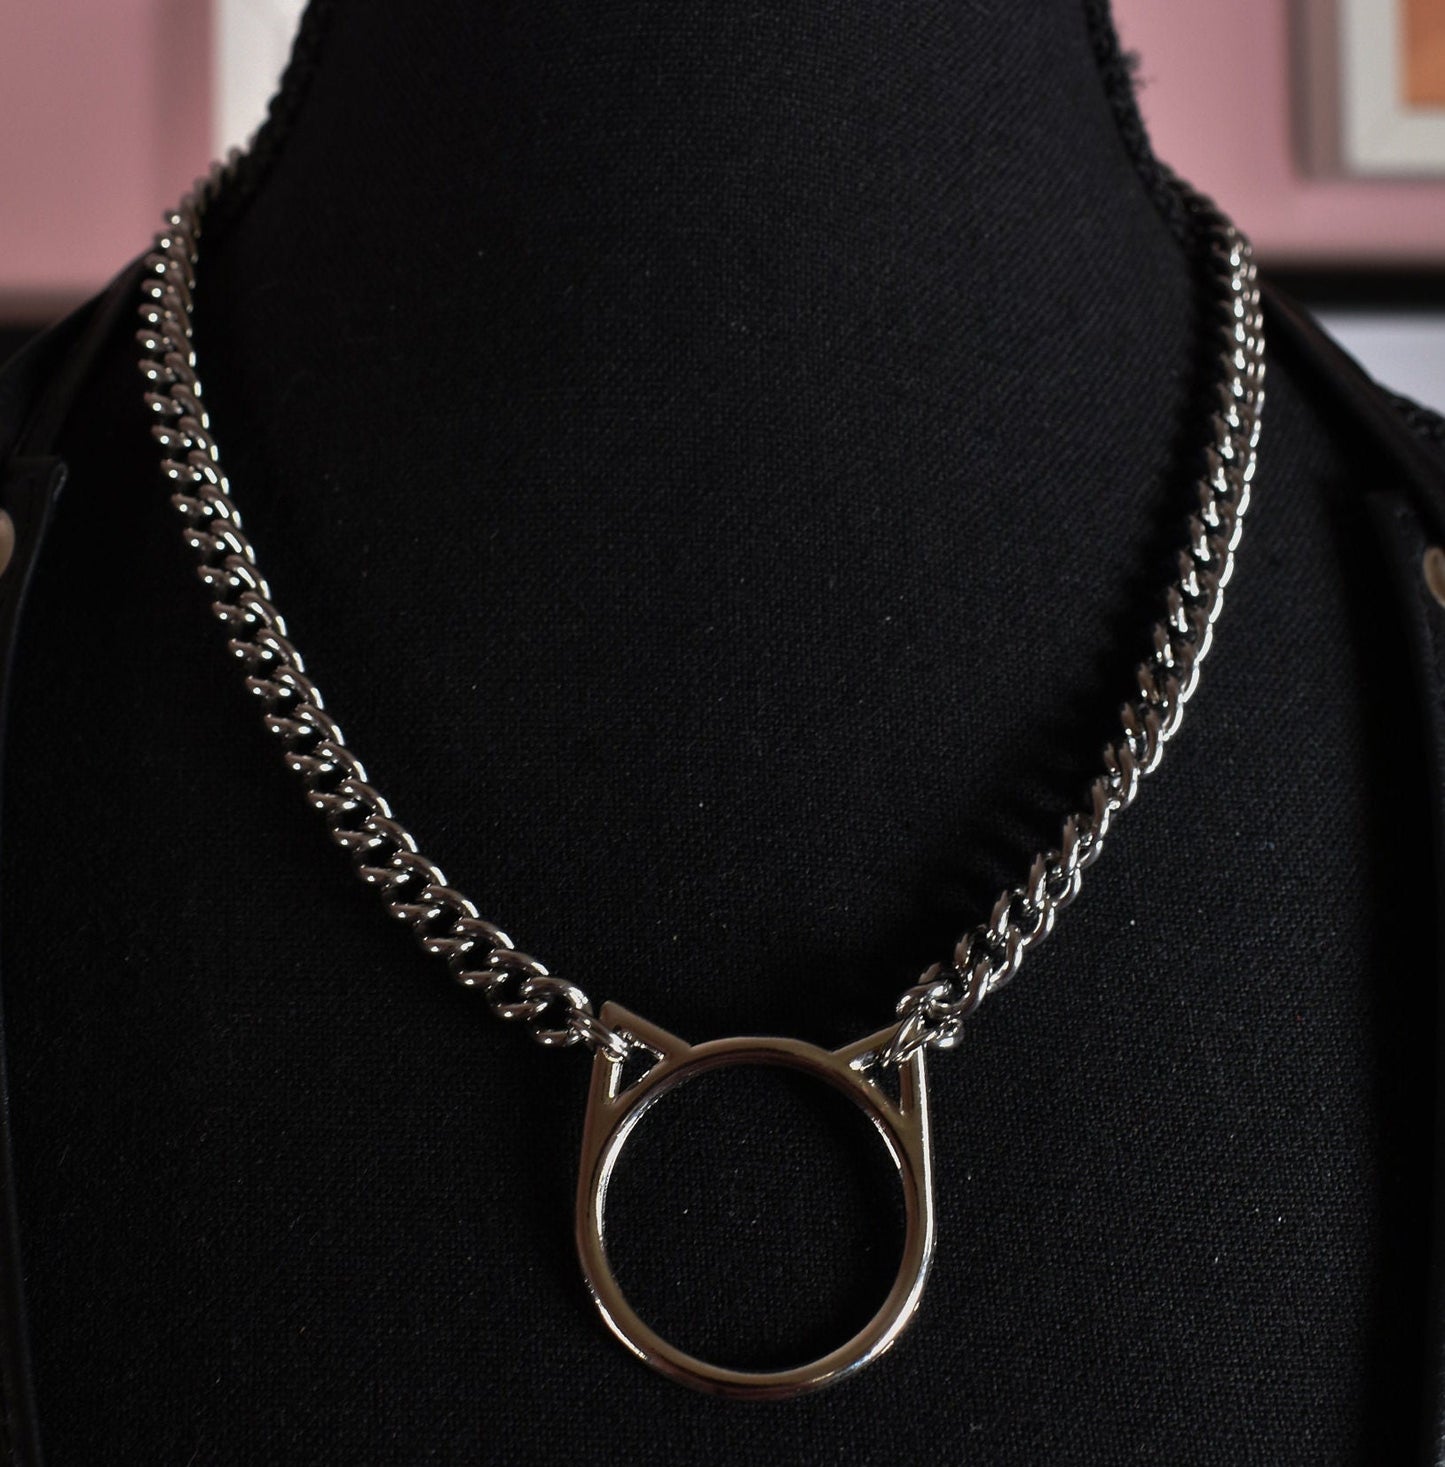 Silver Kitty Ring Necklace / Stainless Steel Chain (Not The Ring See Description)